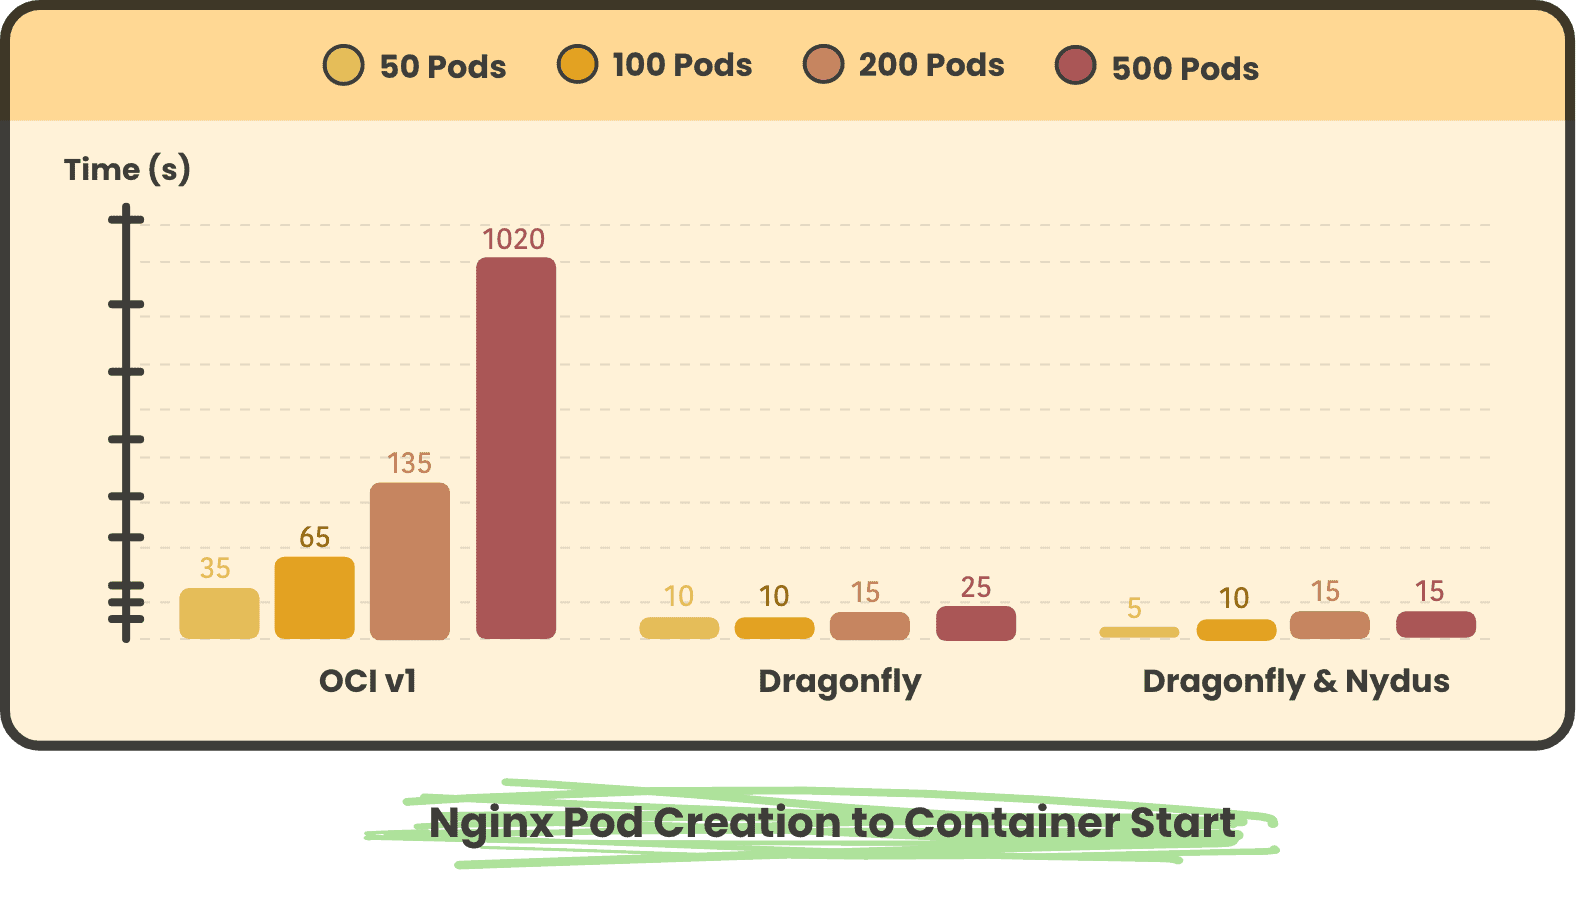 Bar chart showing NGinx Pod Creation to Container Start divided by 50 Pods, 100 Pods, 200 Pods and 500 Pods in OCI v1. Dragonfly, Dragonfly & Nydus